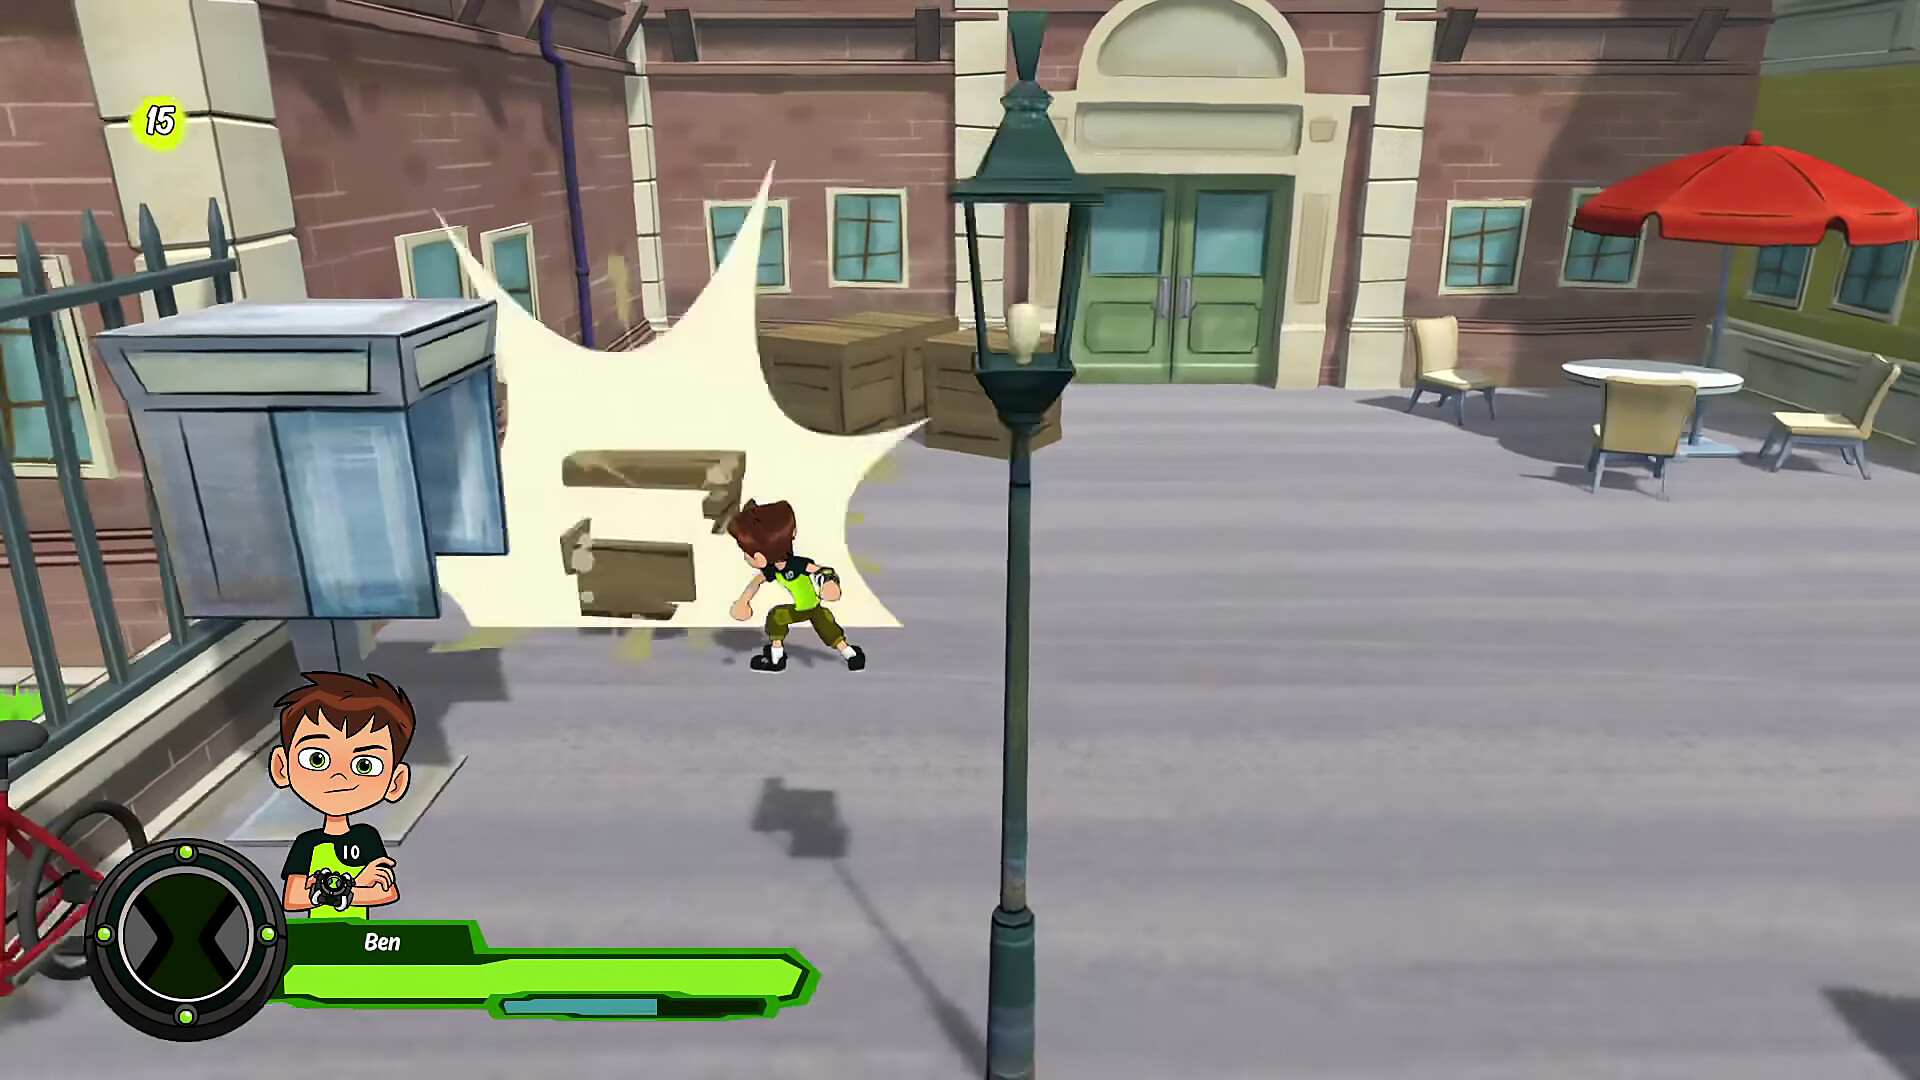 A new Ben 10 game is coming to the PC in Fall 2020